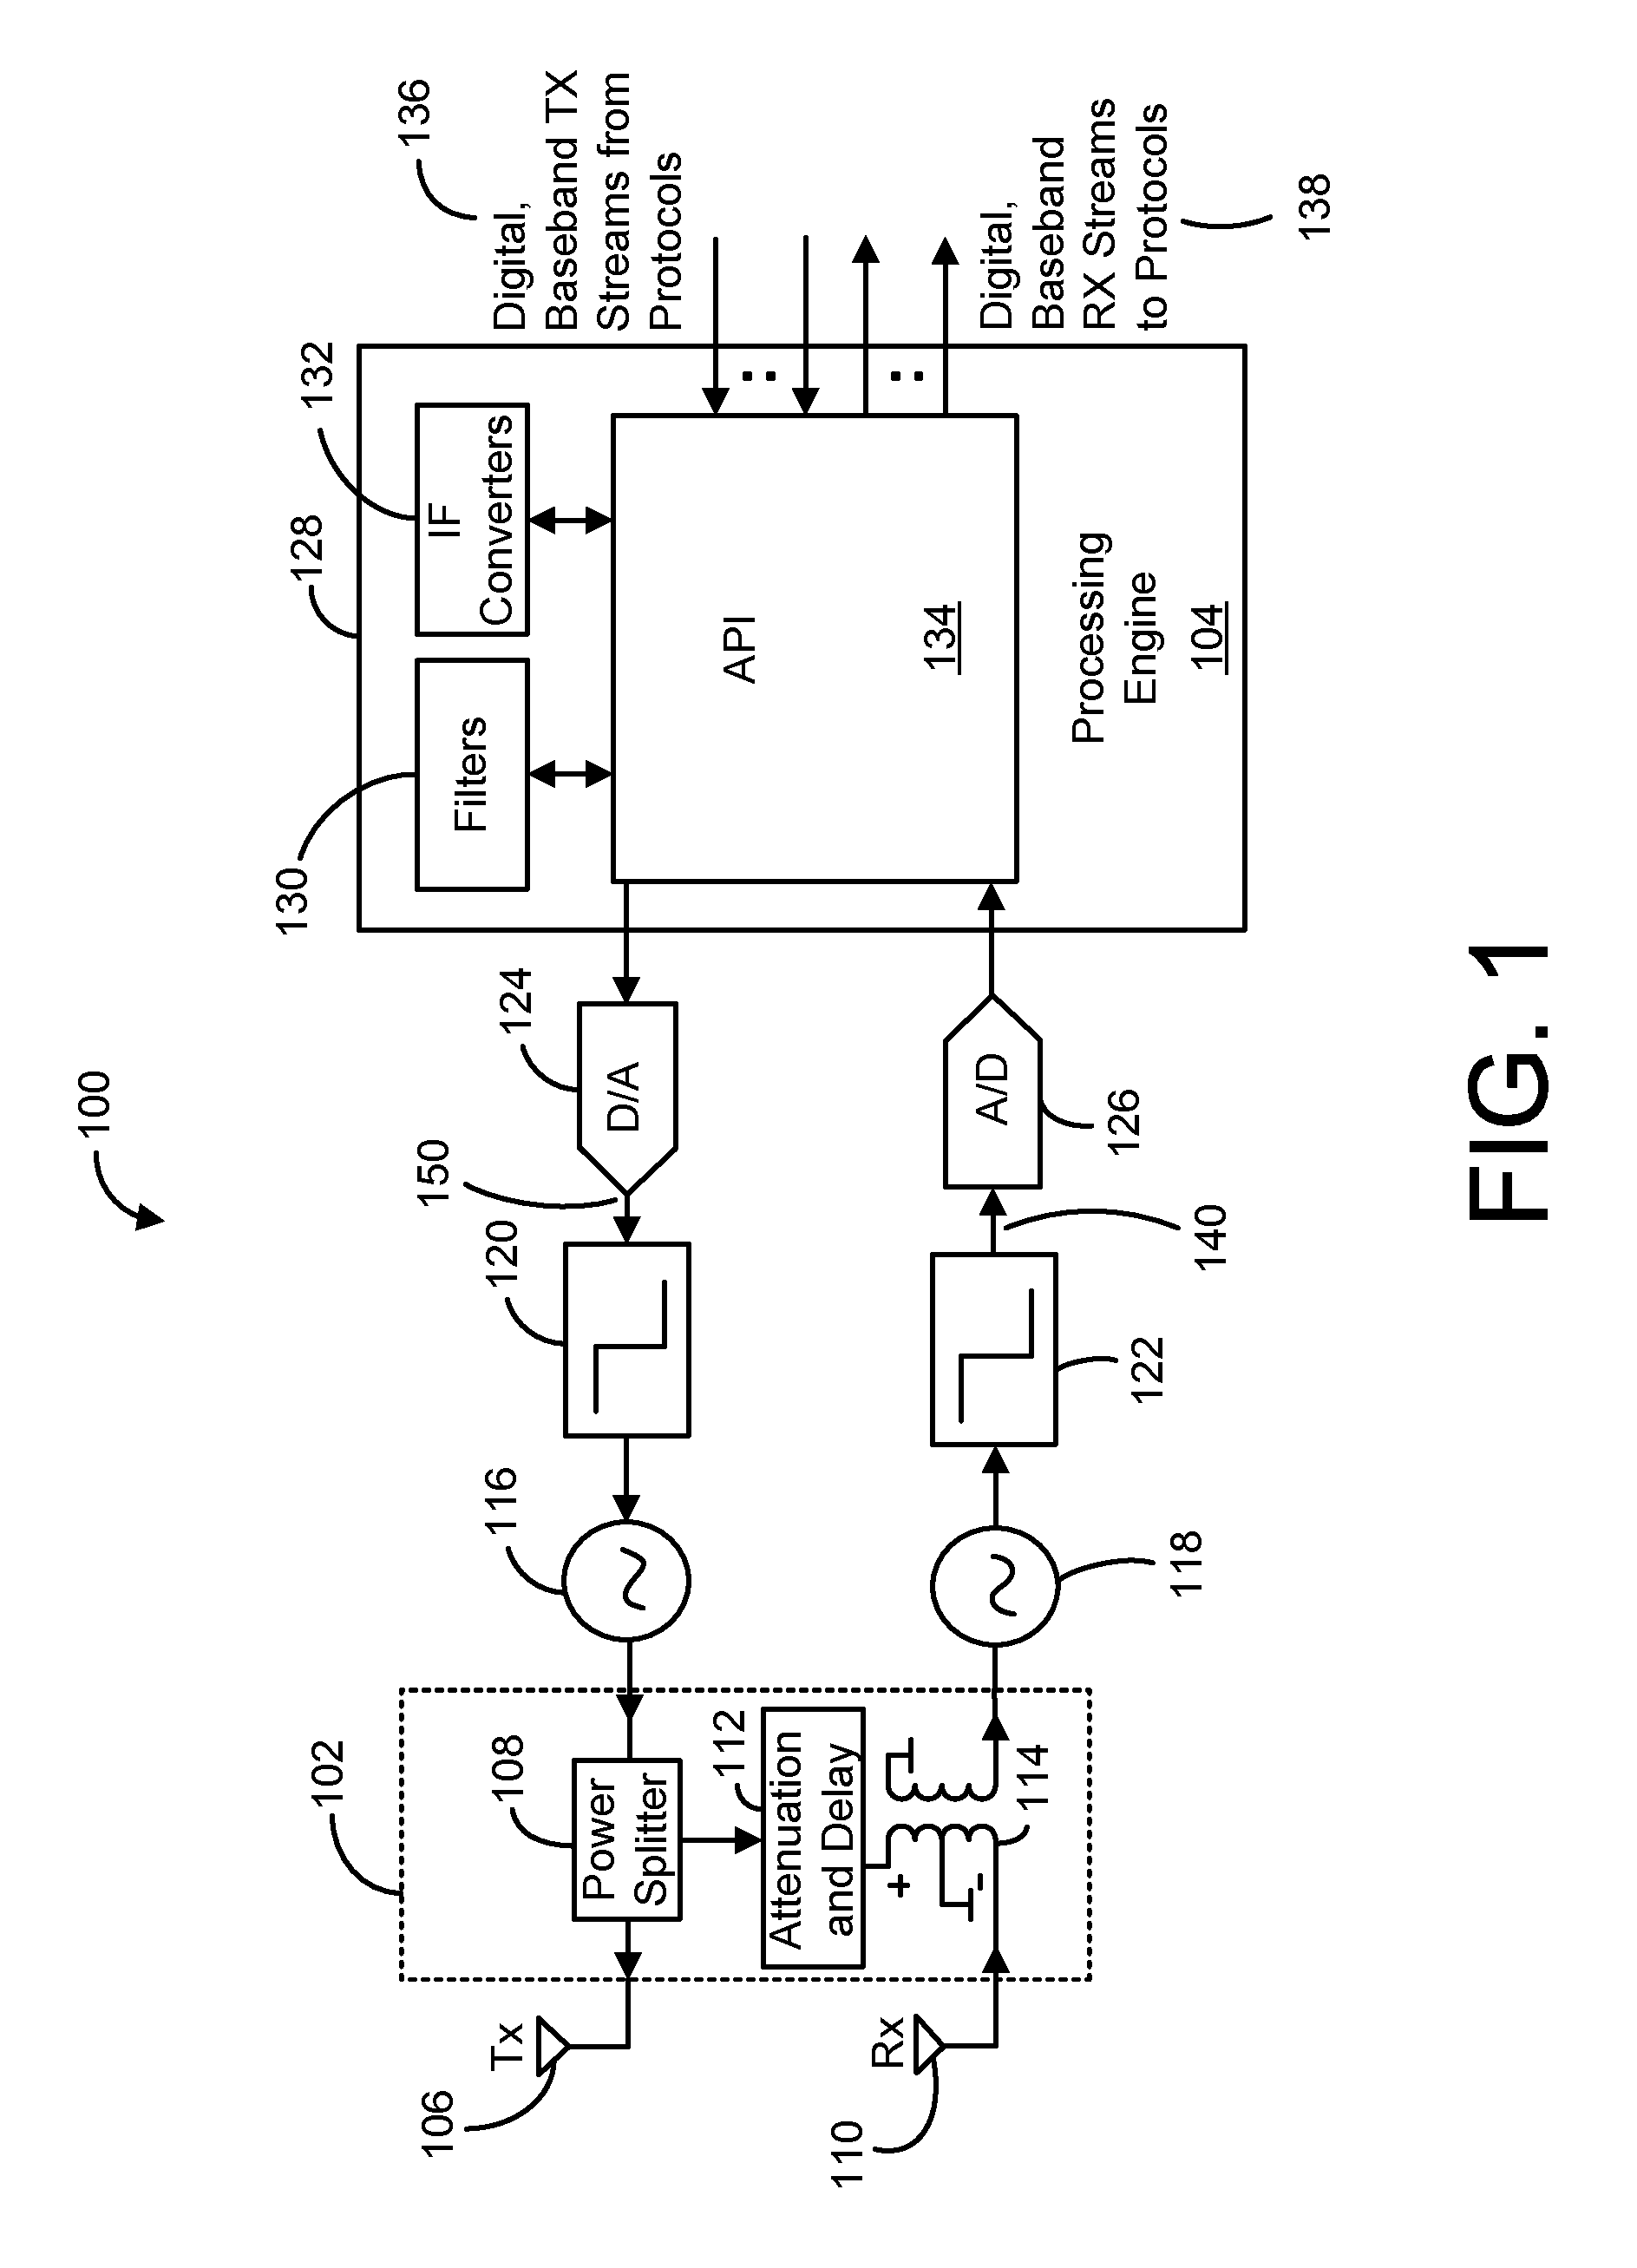 Systems and methods for cancelling interference using multiple attenuation delays